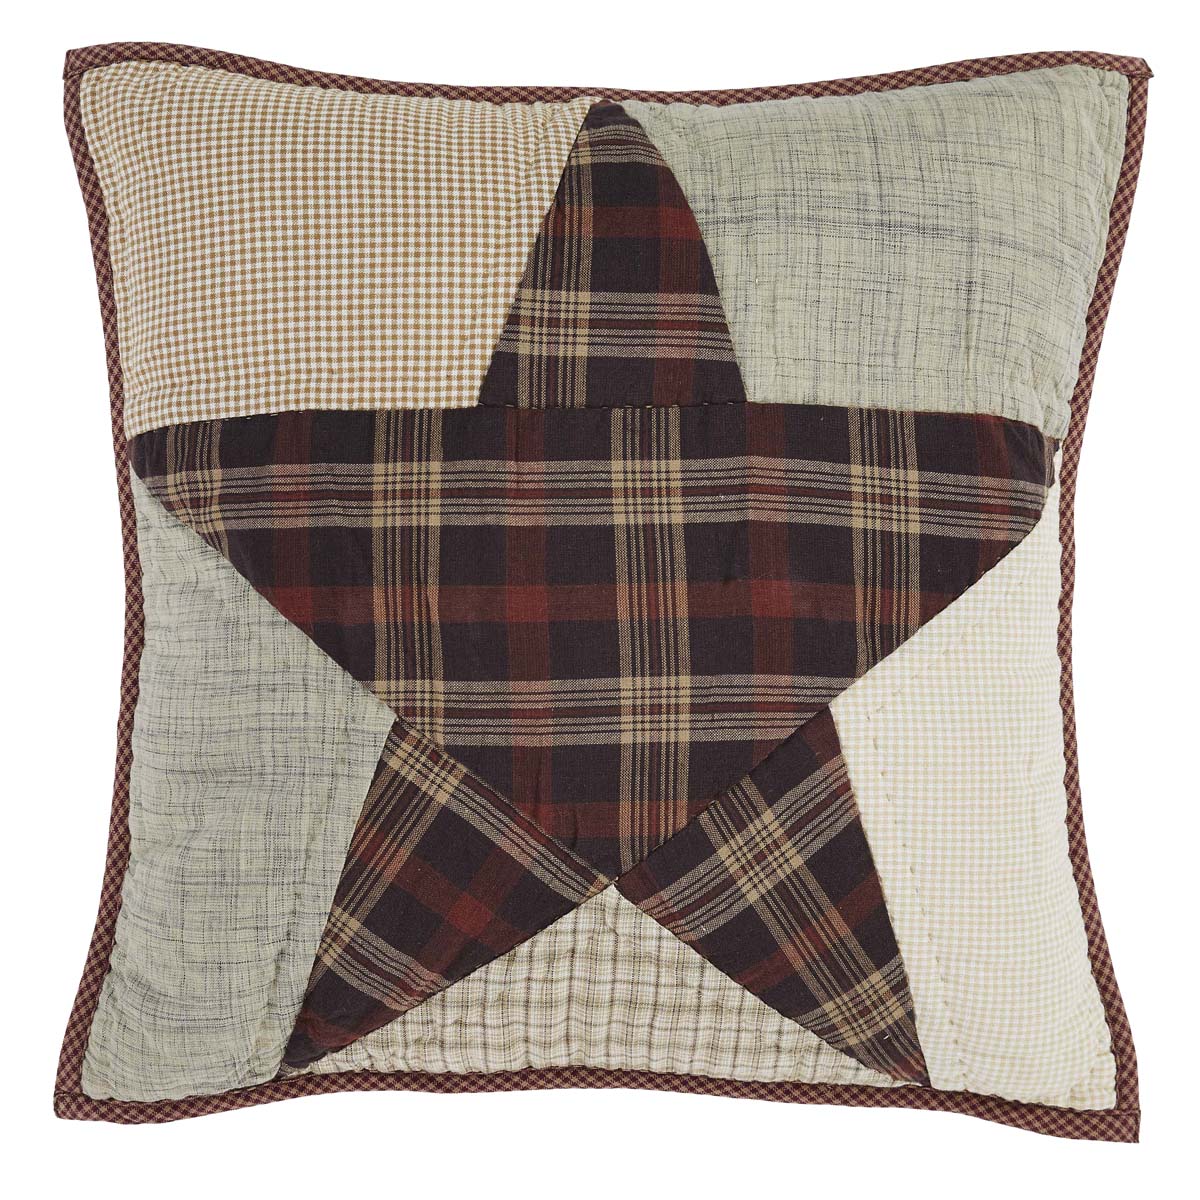 32890-Abilene-Star-Quilted-Pillow-16x16-image-4